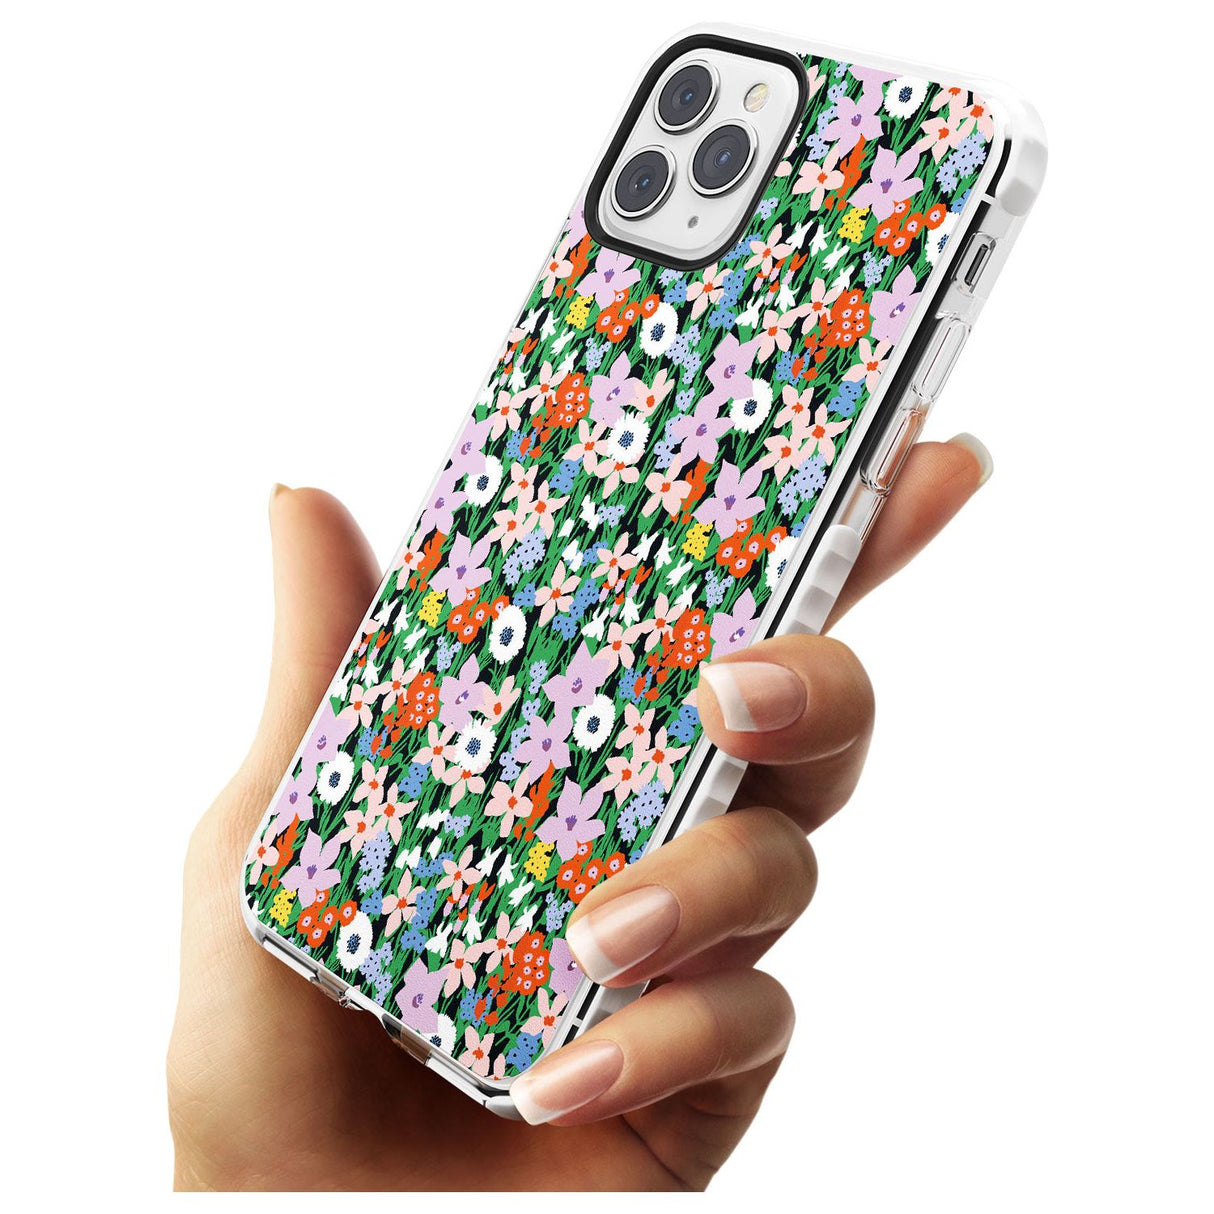 Jazzy Floral Mix: Solid Slim TPU Phone Case for iPhone 11 Pro Max